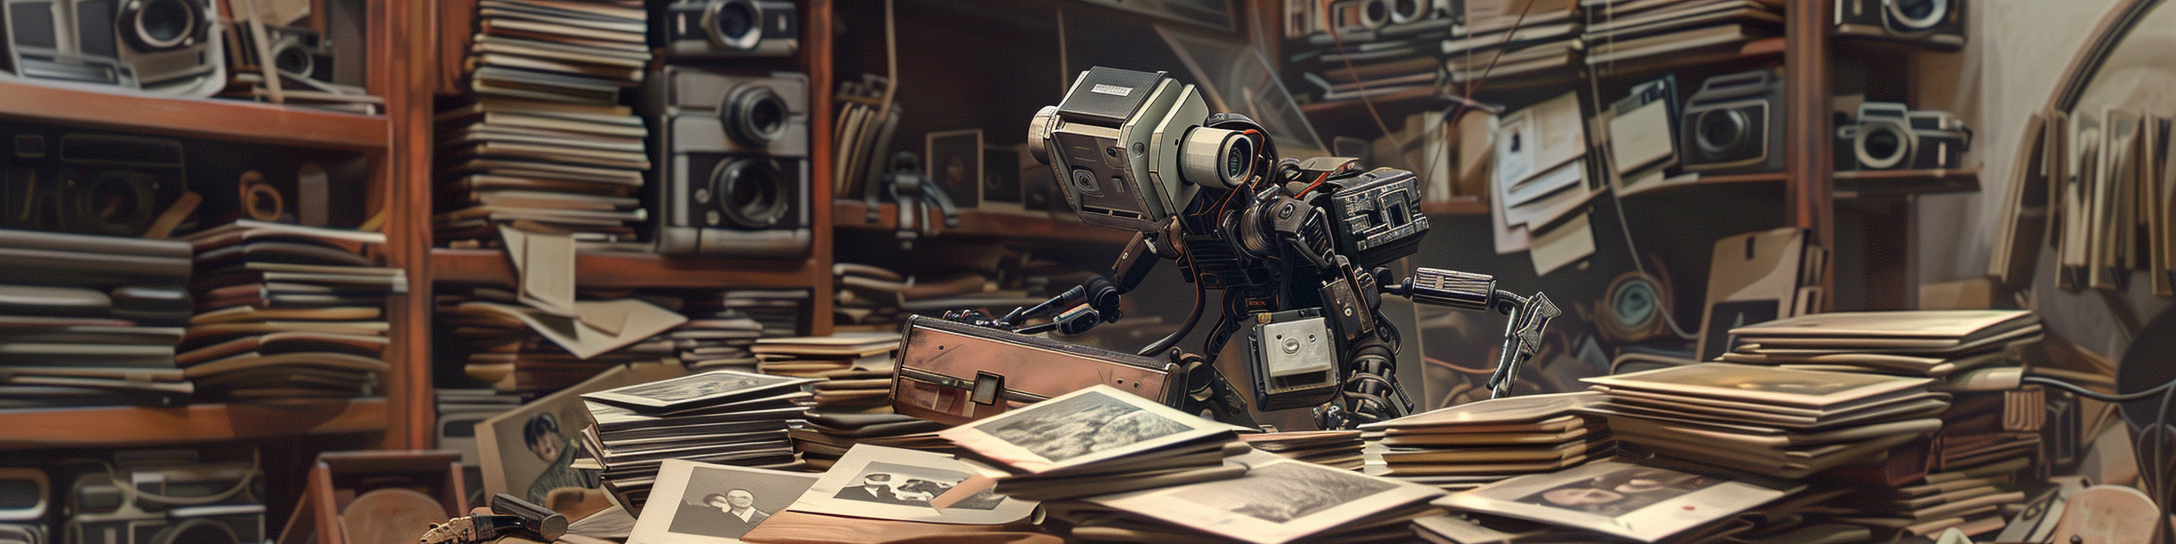 A robot sorting through piles of photos, surrounded by old cameras